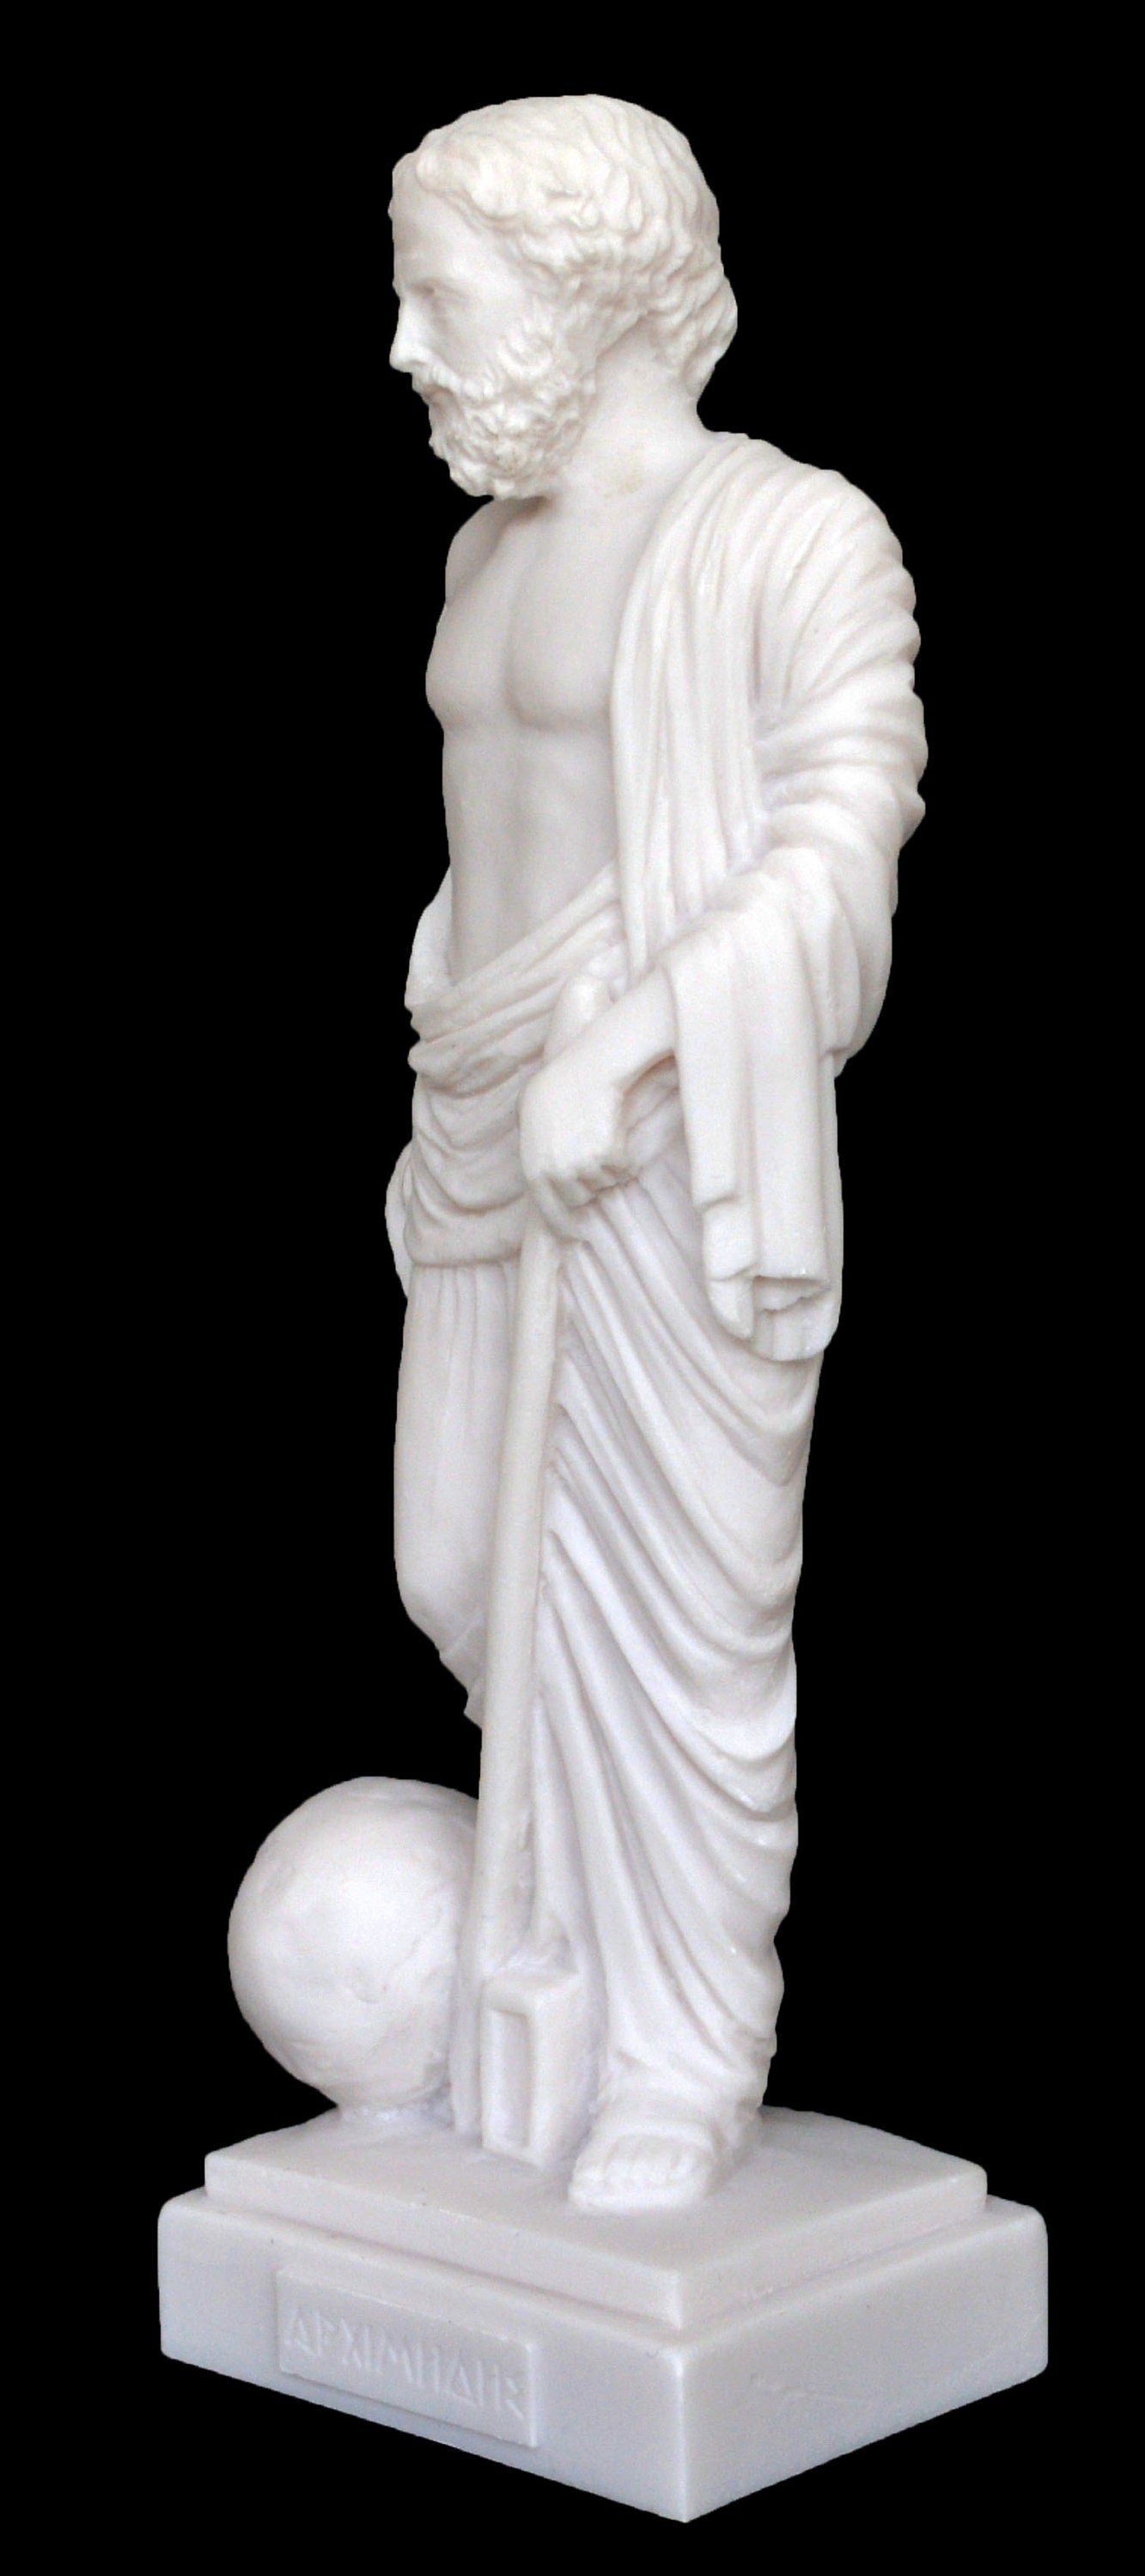 Archimedes of Syracuse - 287– 212 BC - Greek Mathematician, Physicist, Engineer, Astronomer, and Inventor  - Alabaster Statue